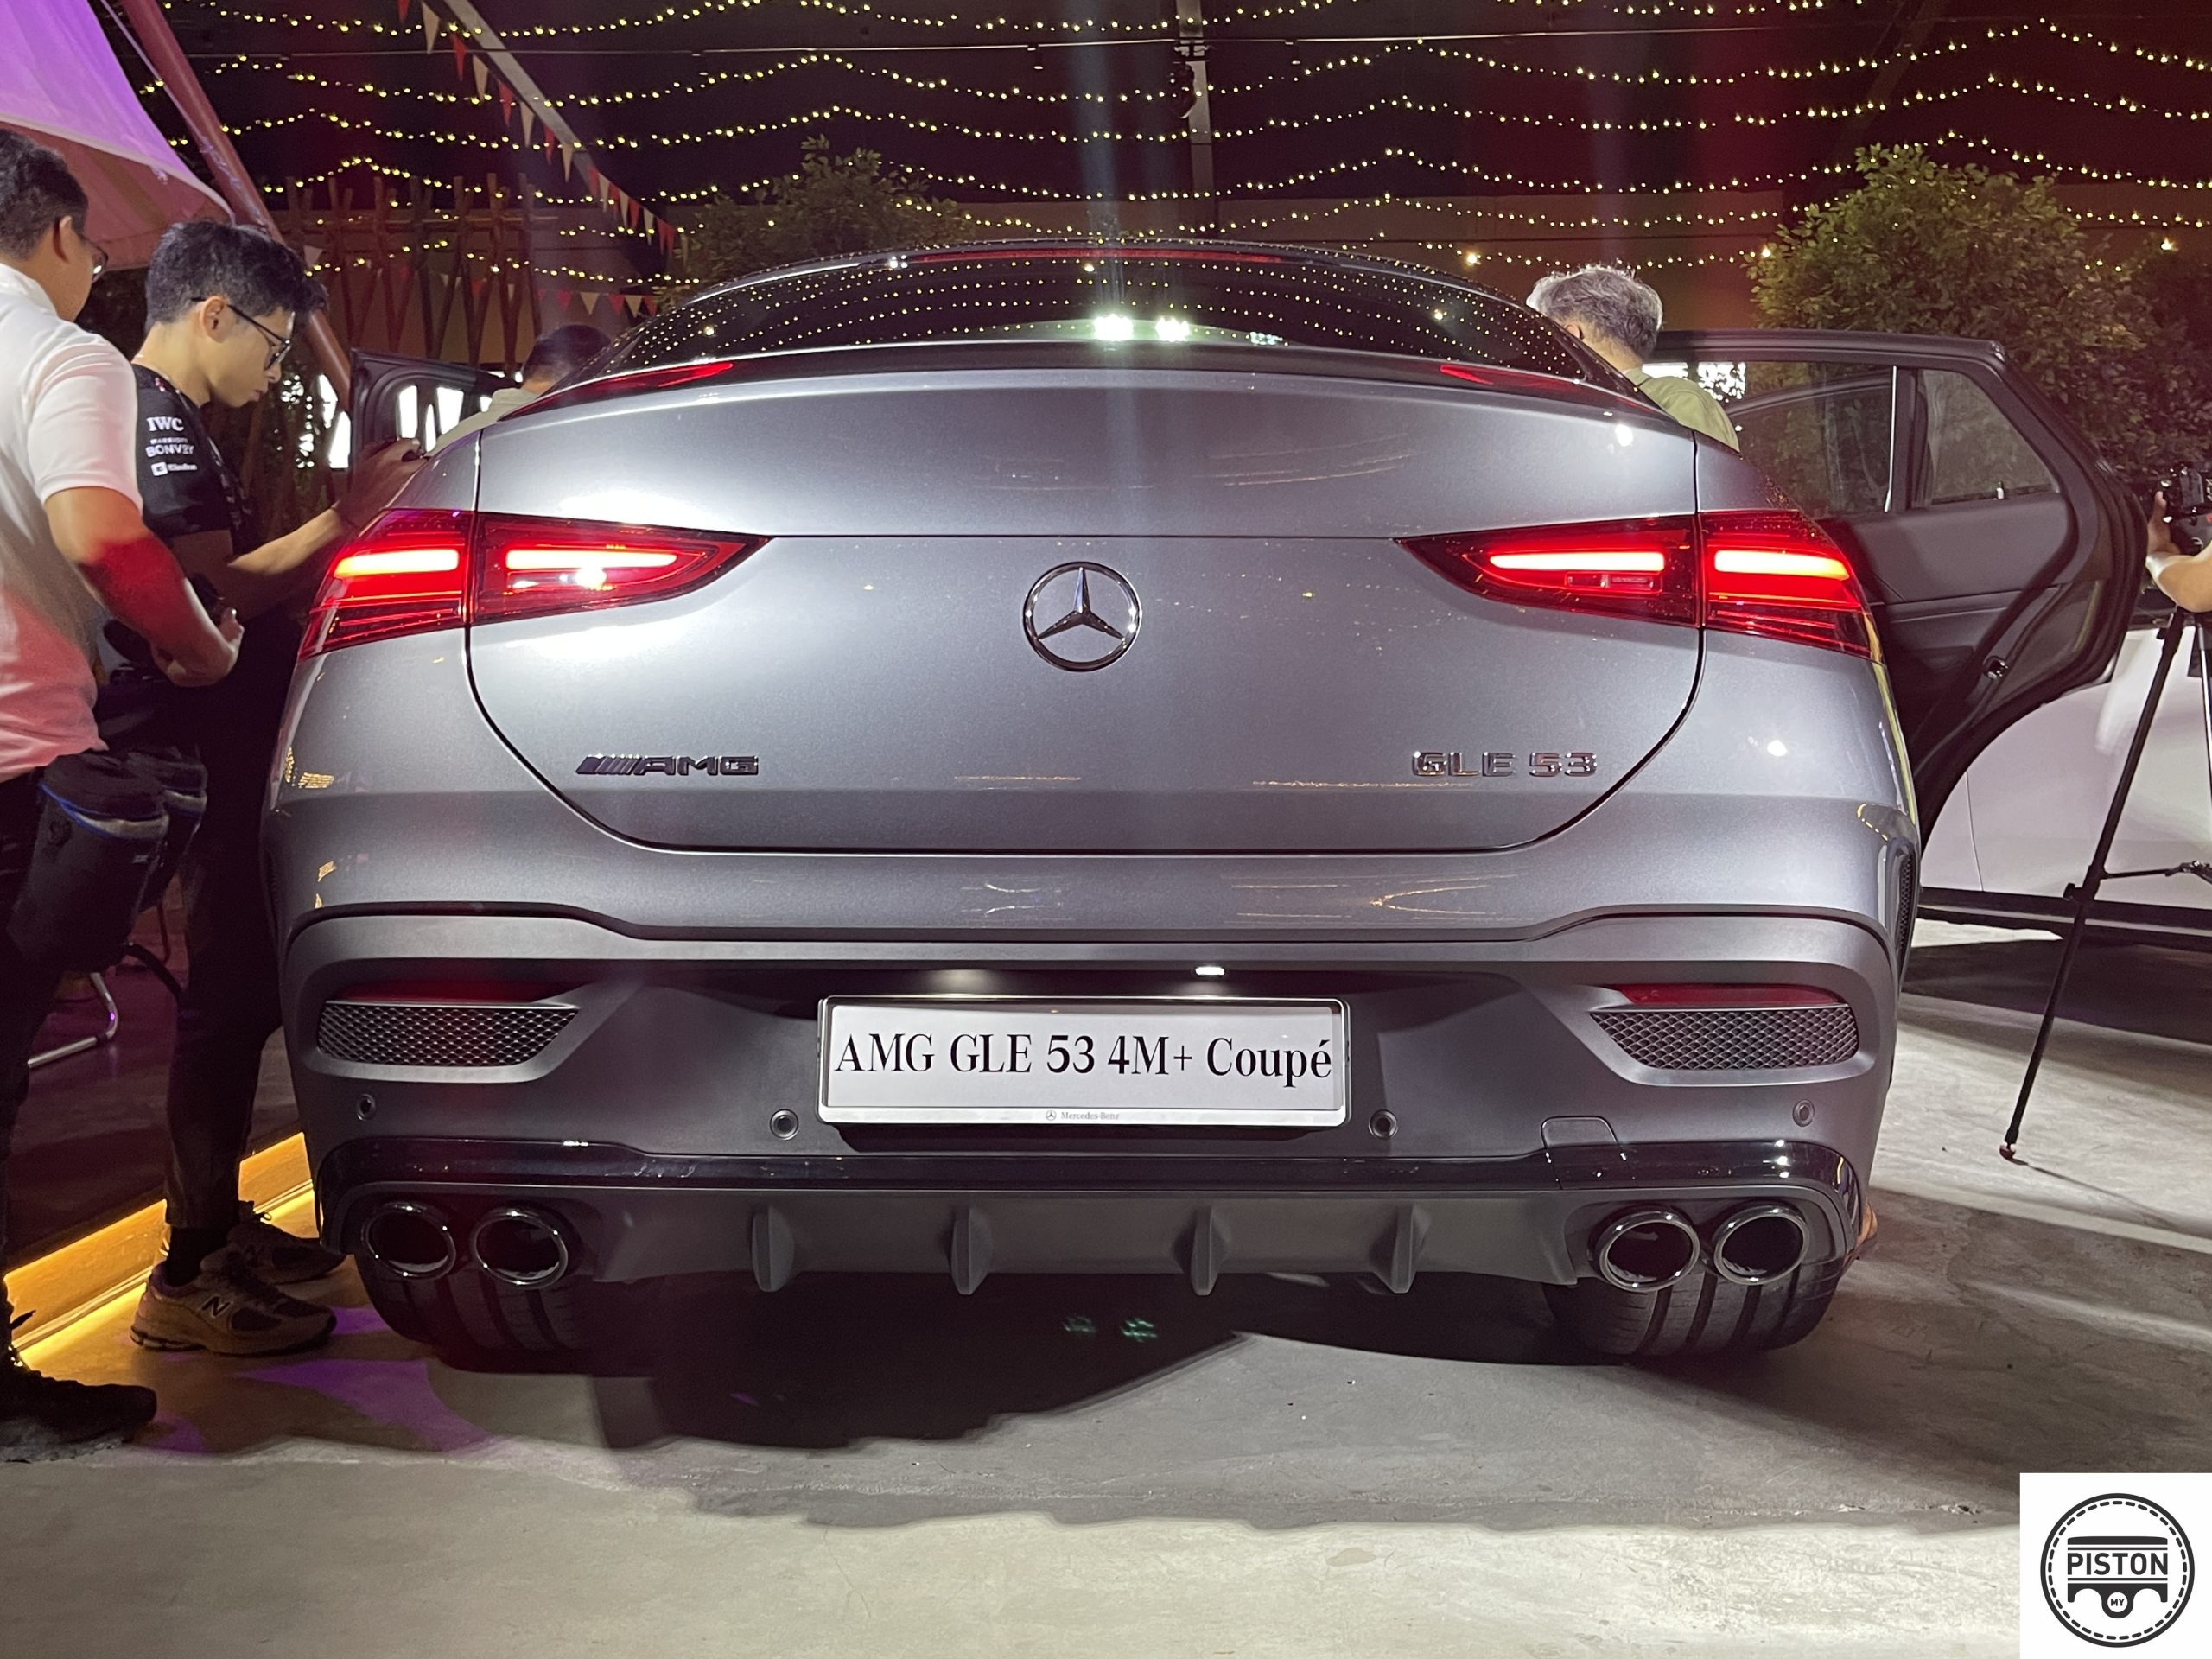 mercedes-amg gle 53 4matic+ coupé: elevating sportiness and luxury